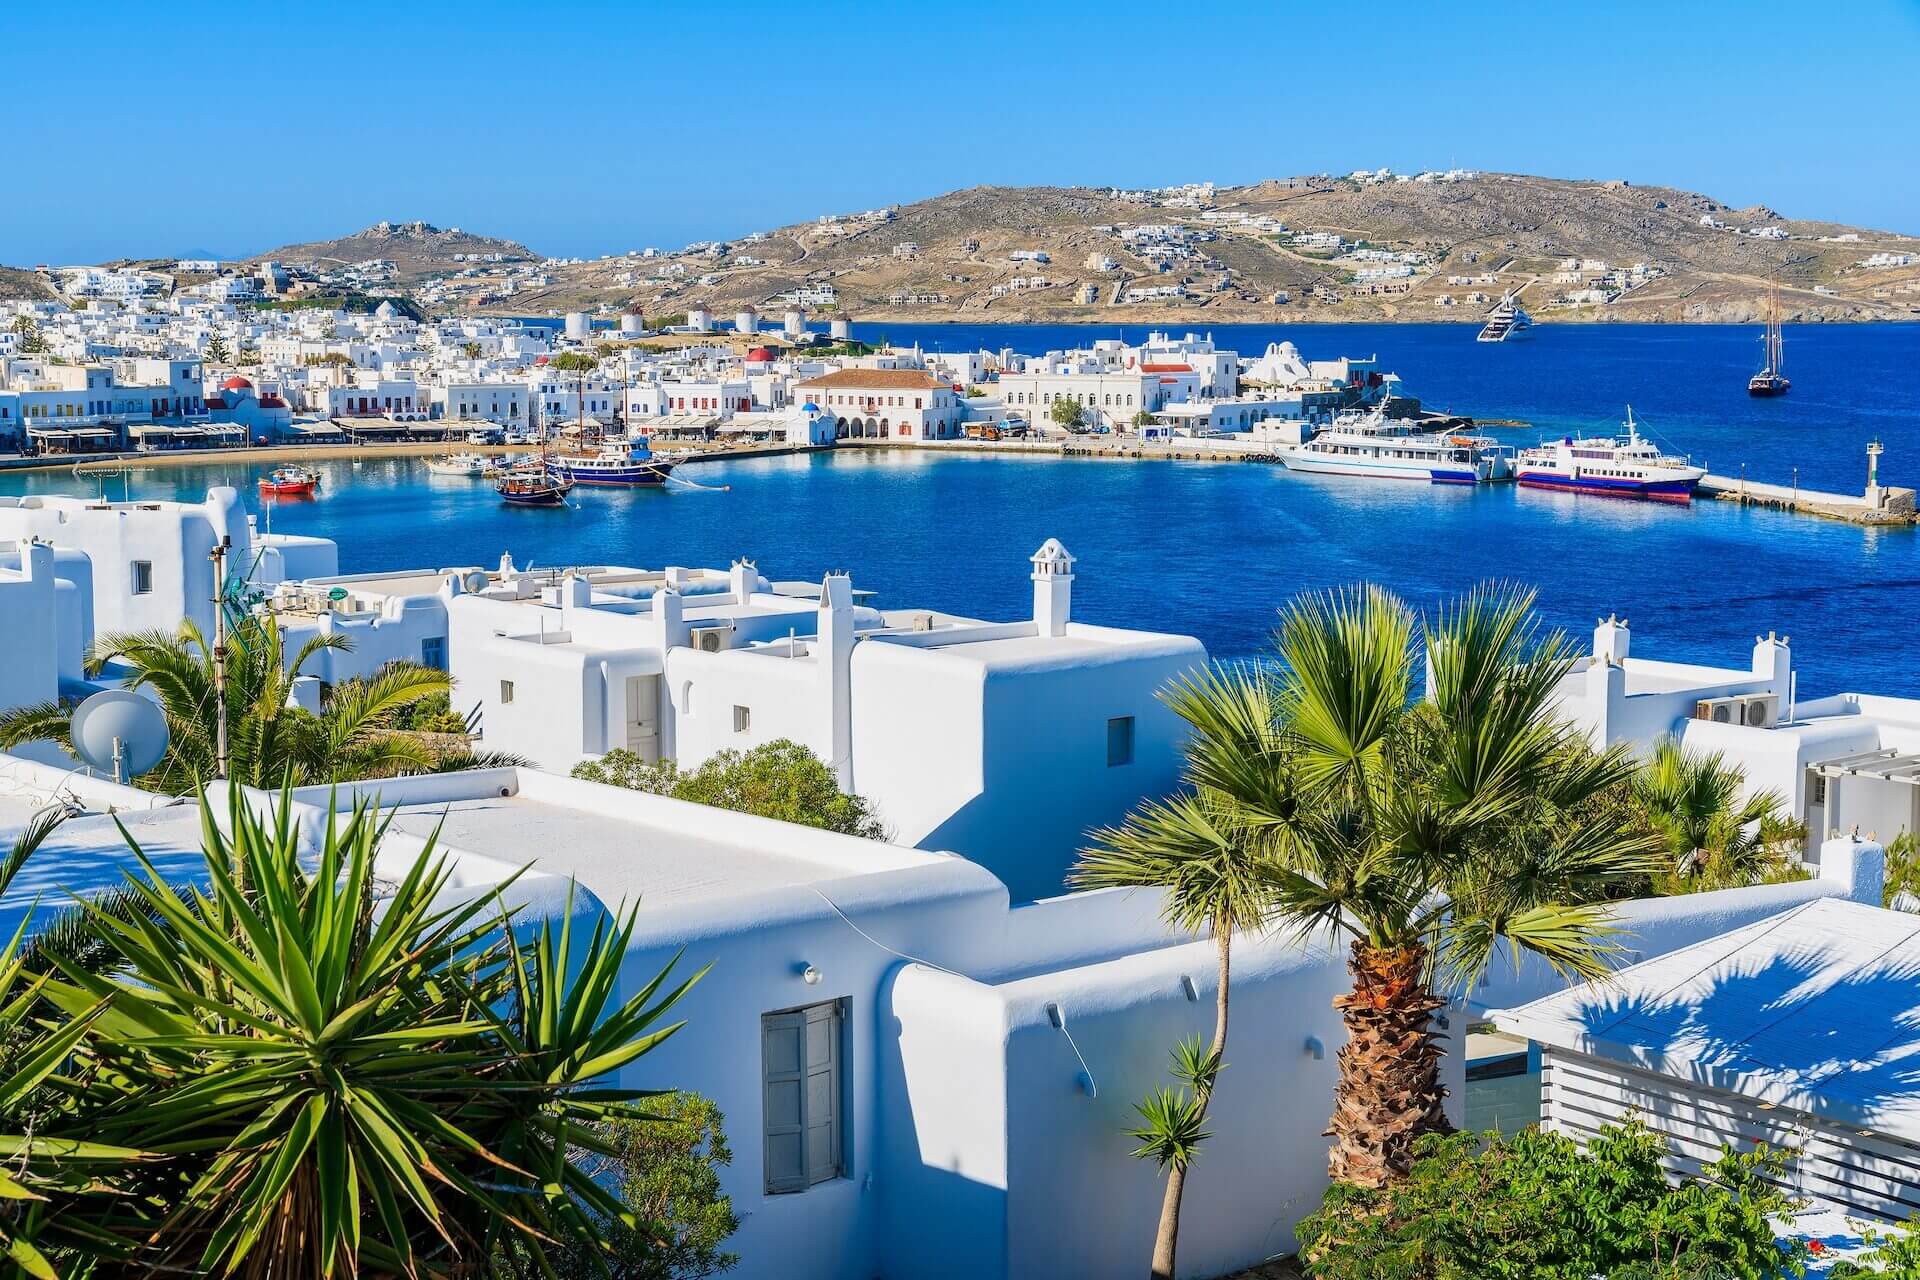 The view of Mykonos town